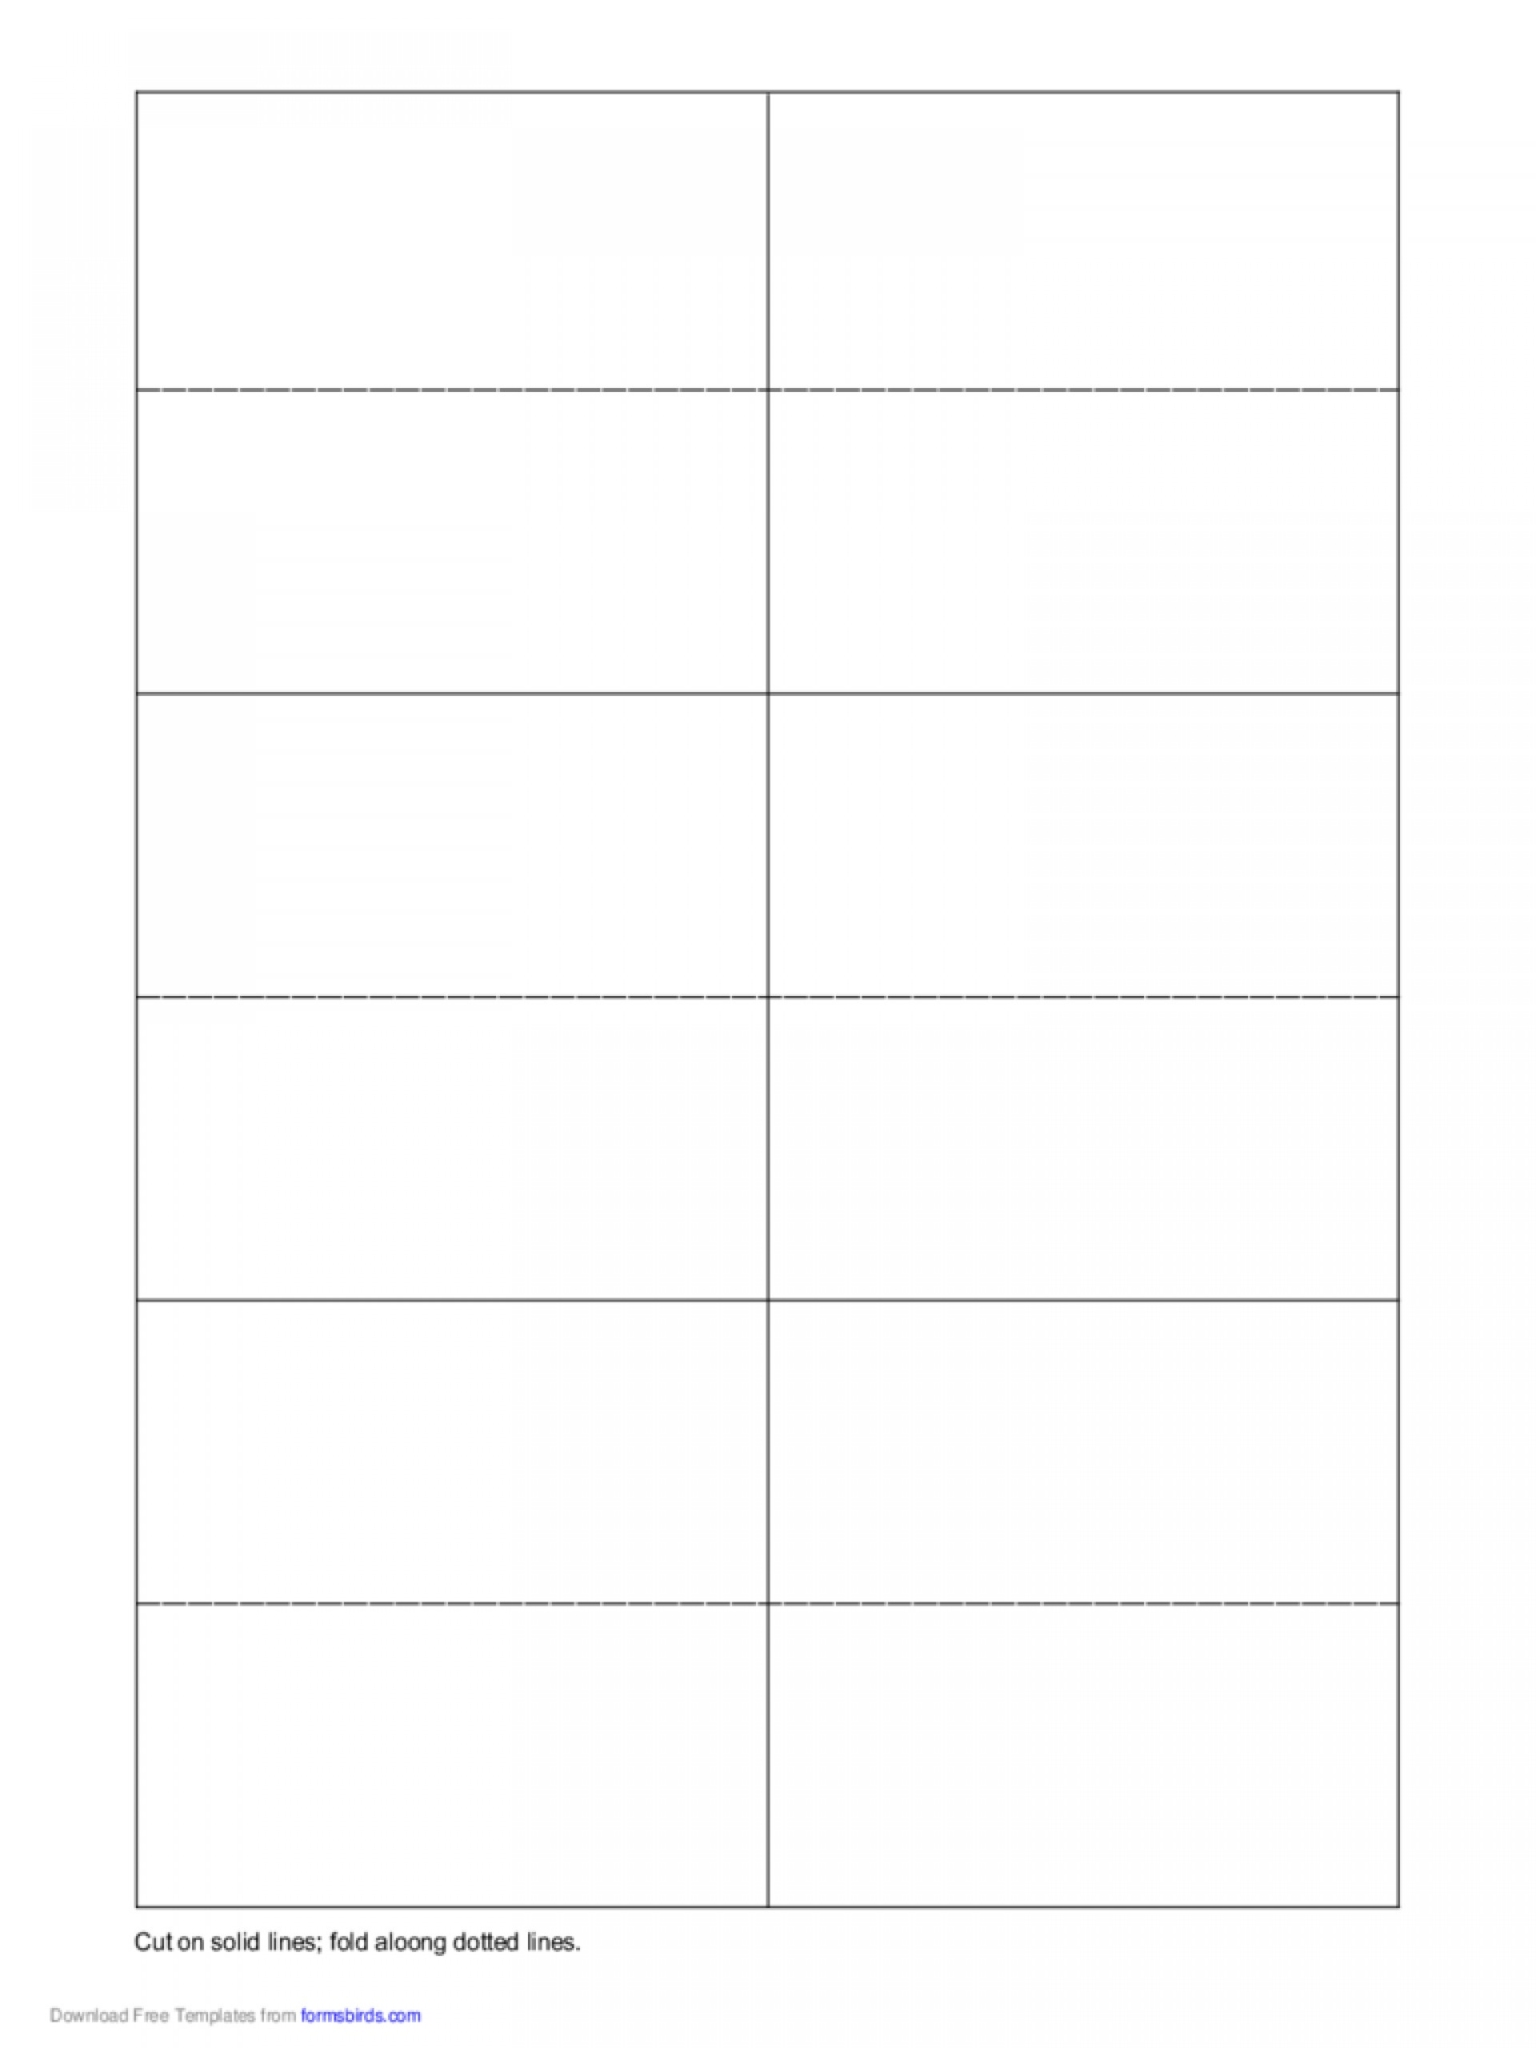 folded-free-place-card-template-6-per-sheet